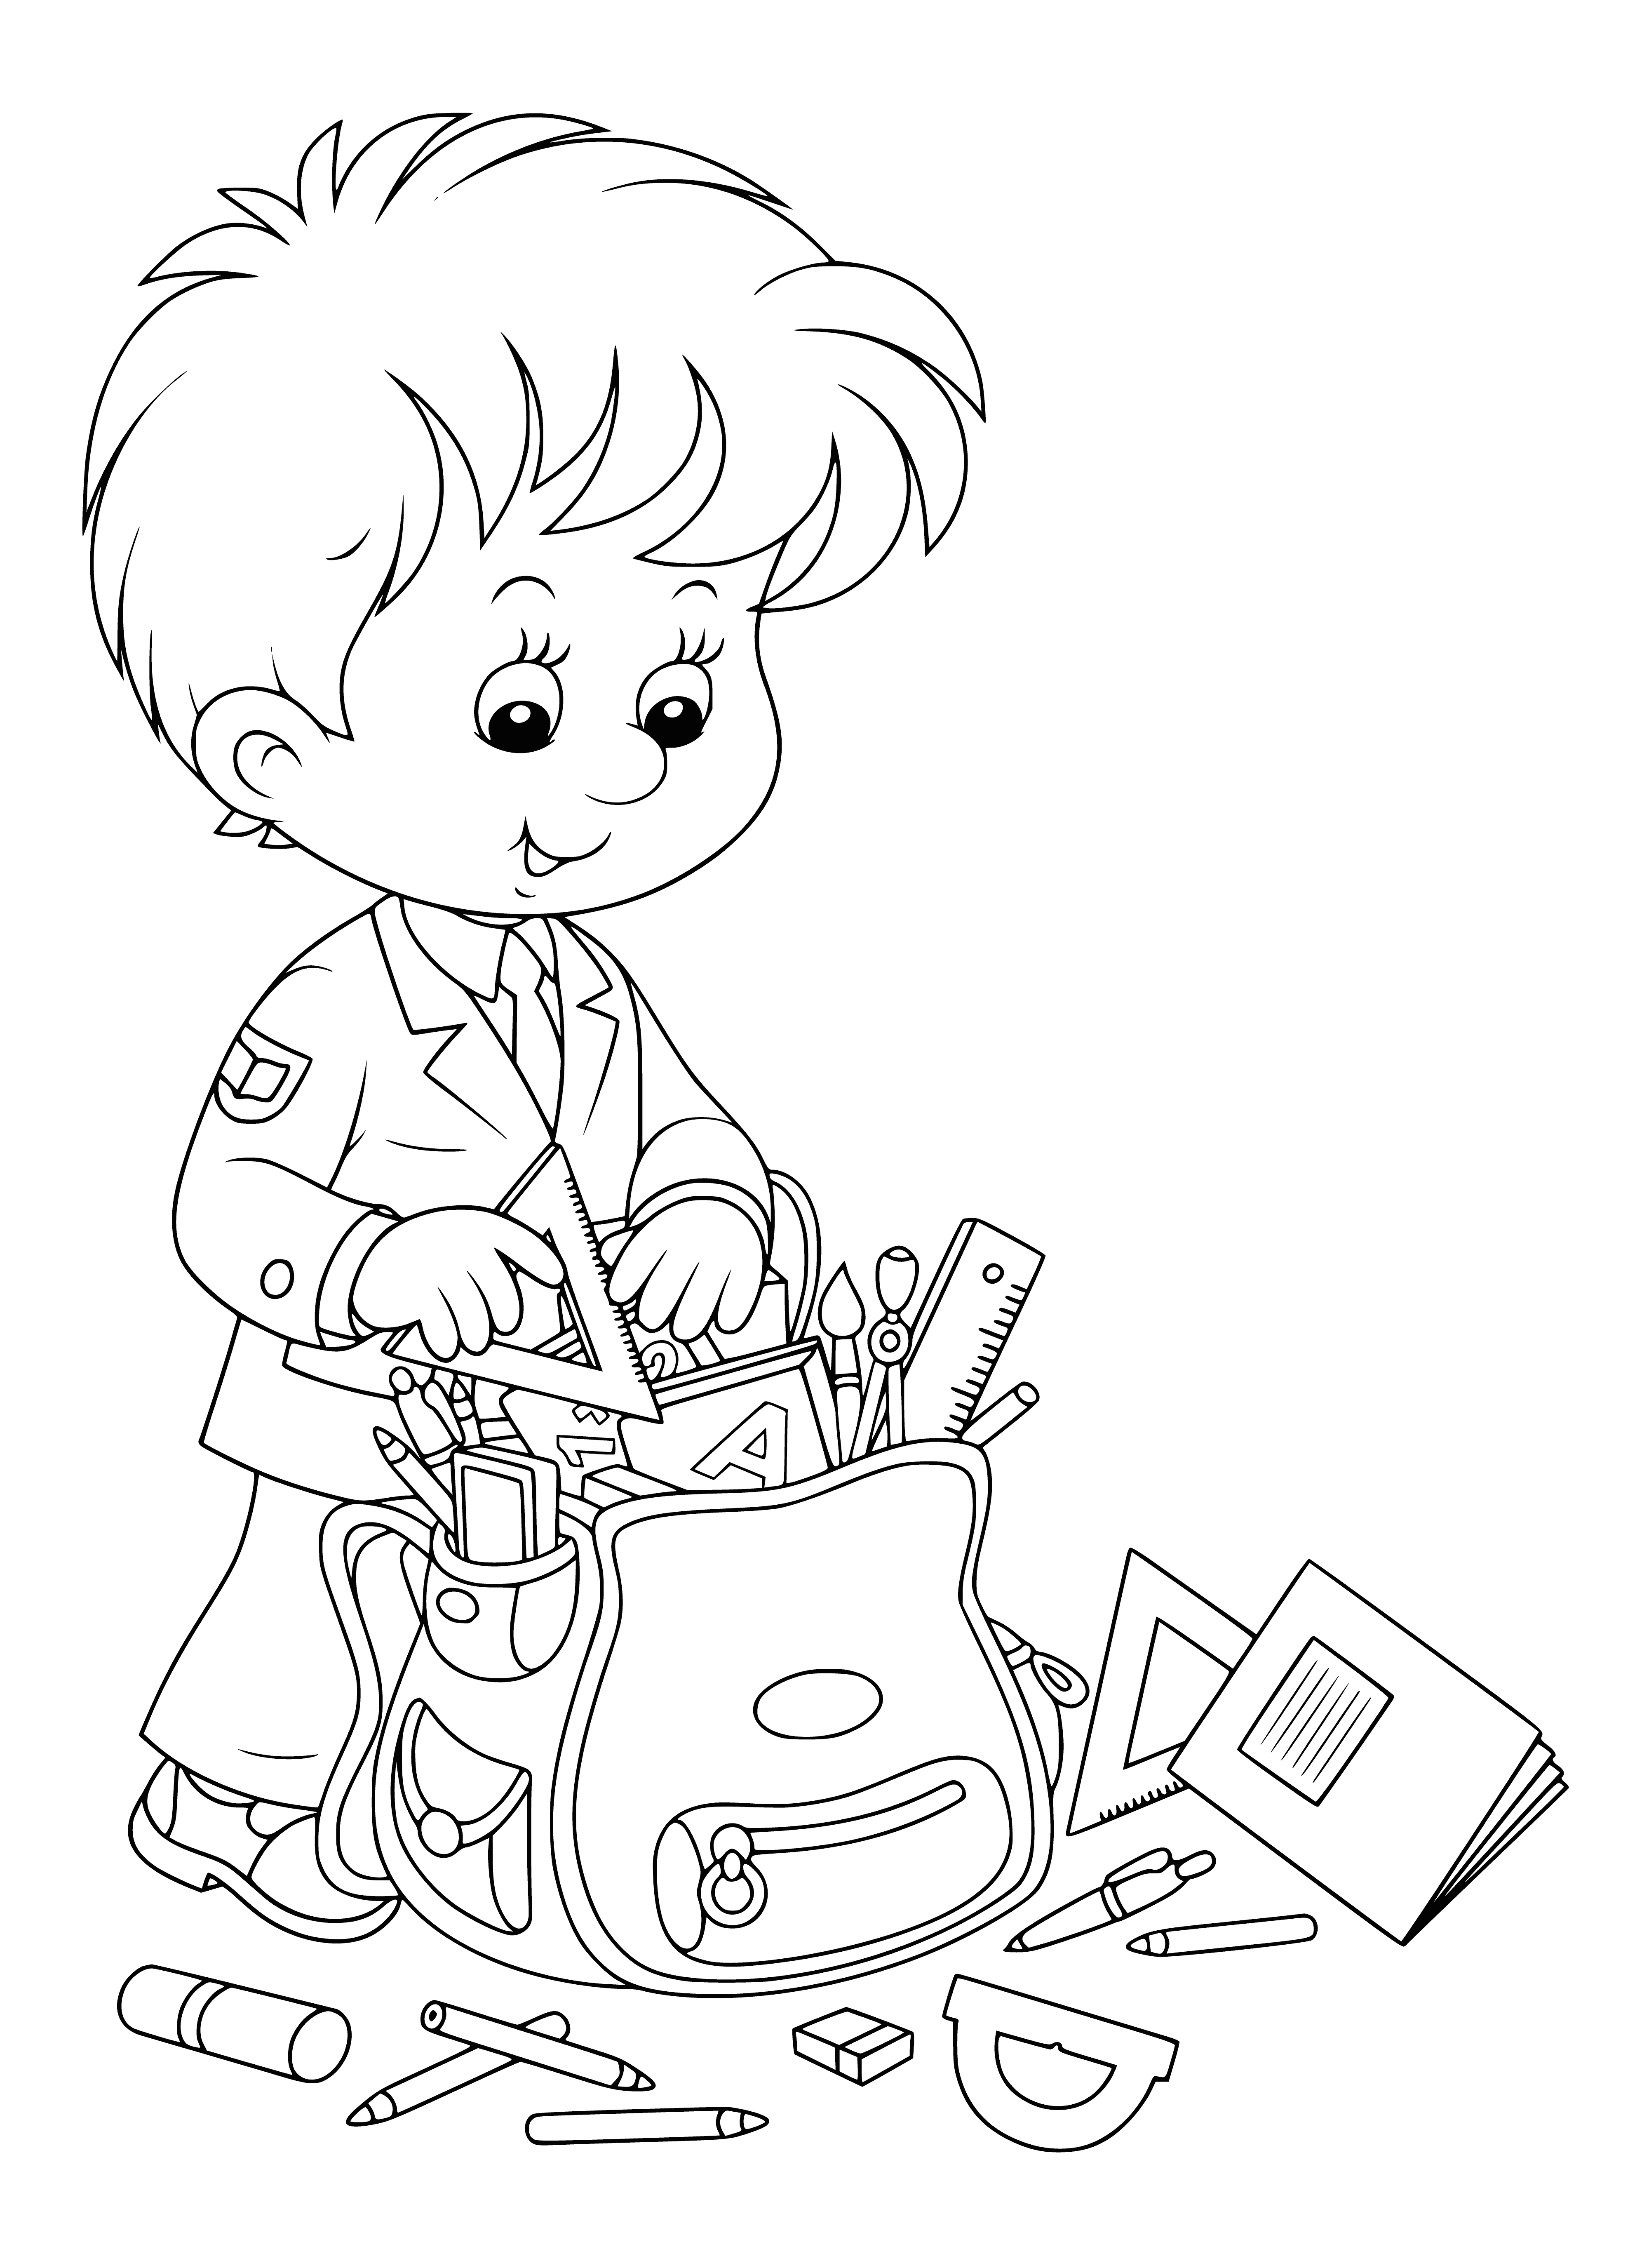 coloring page: Boy walking to school carrying briefcase against clear, tree-filled sky.